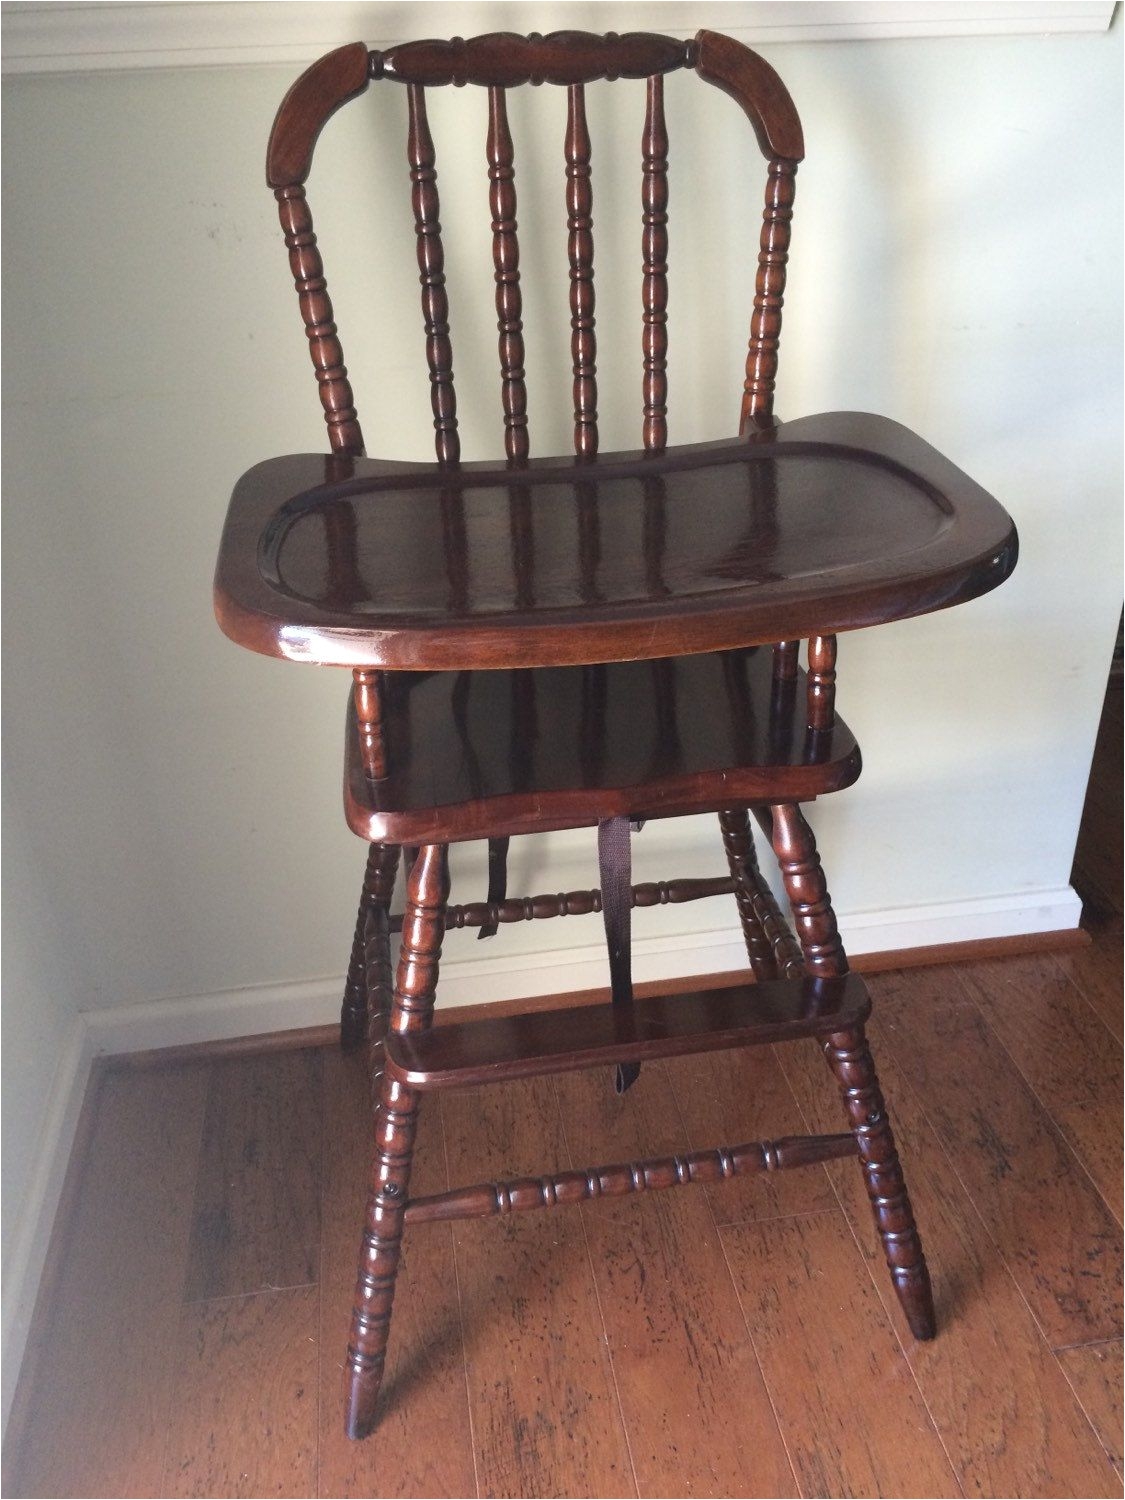 4 Moms High Chair Vintage Wooden High Chair Jenny Lind Antique High Chair Vintage